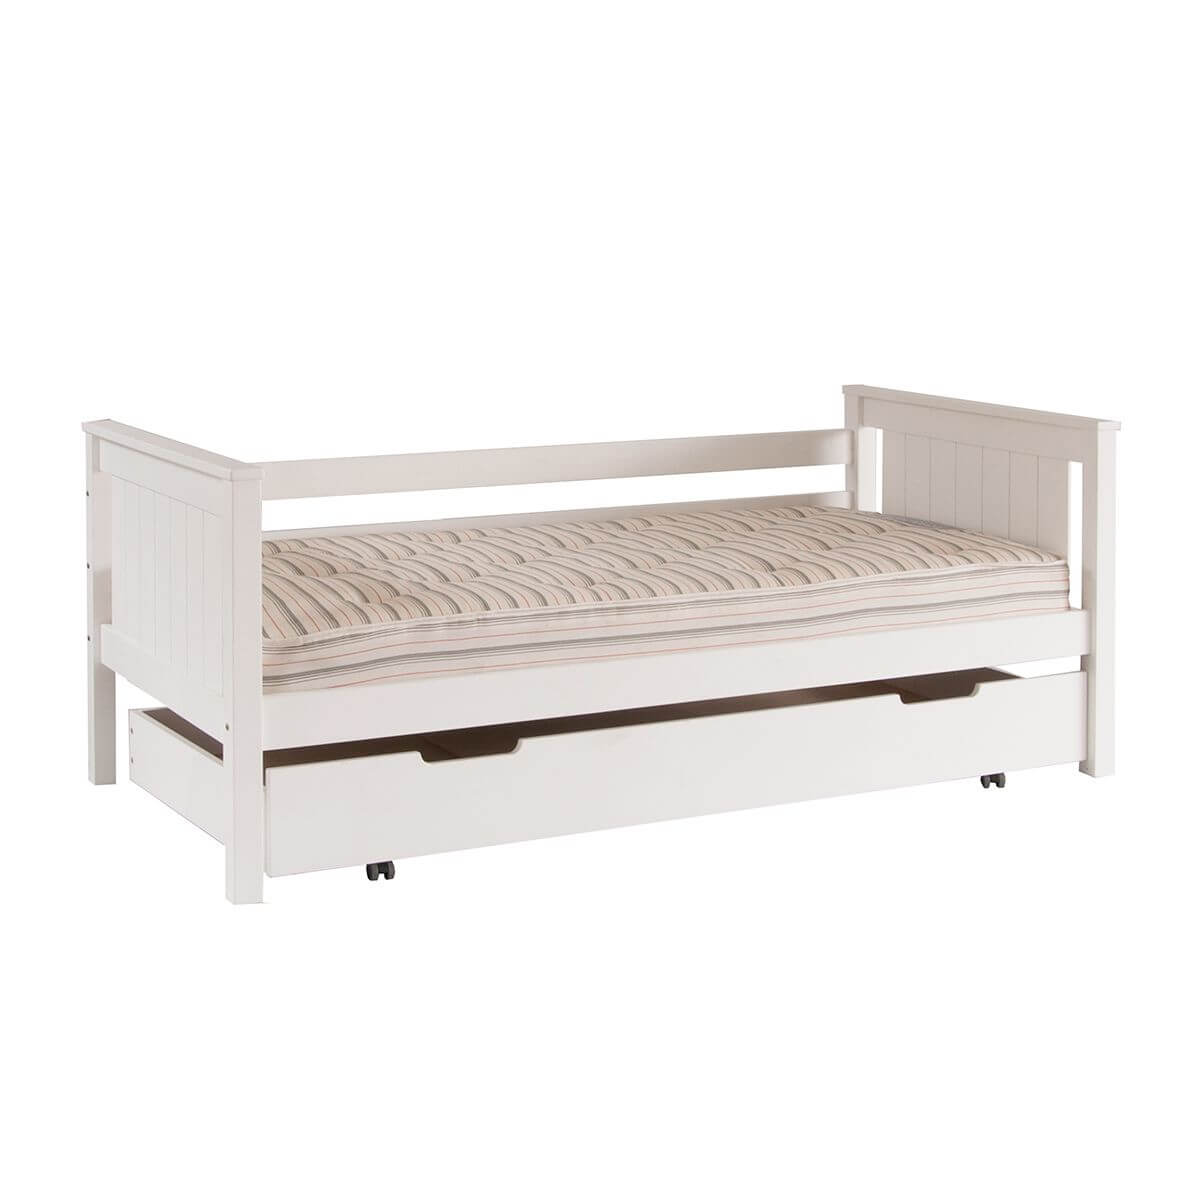 Sienna Classic Beech Daybed White with Trundle Guest Bed Cut Out